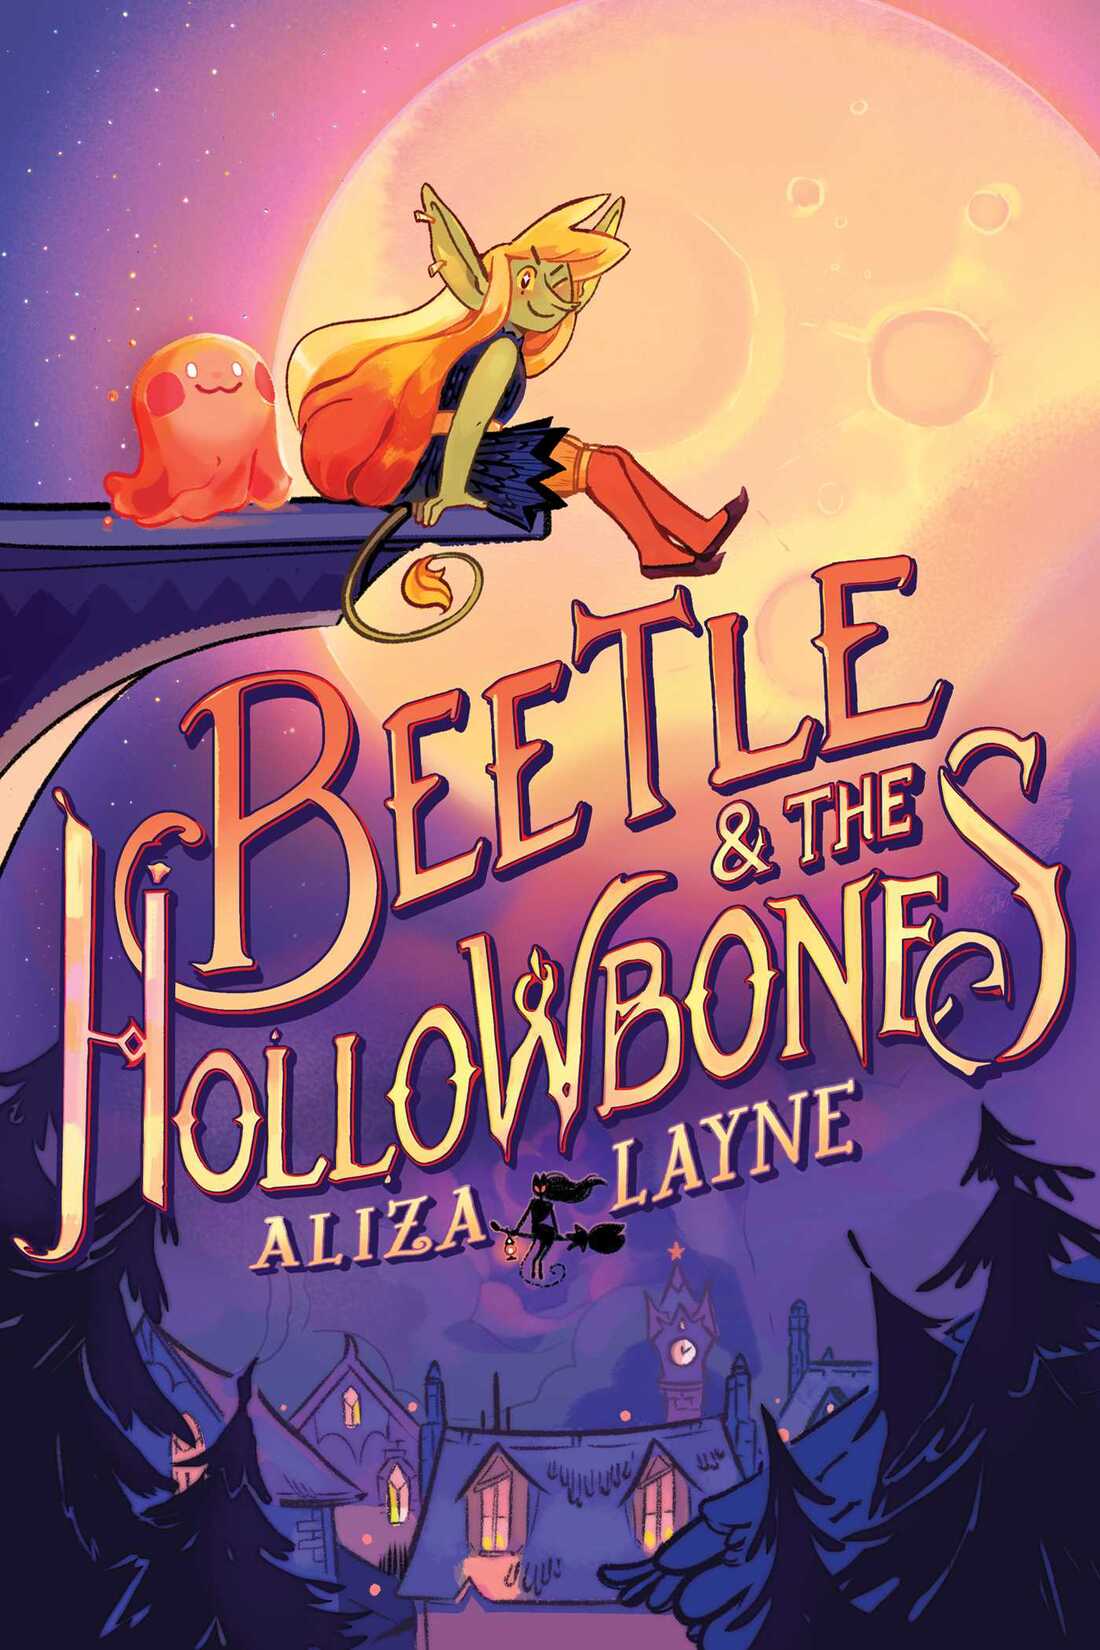 Cover of Beetle & The Hollowbones by Aliza Layne